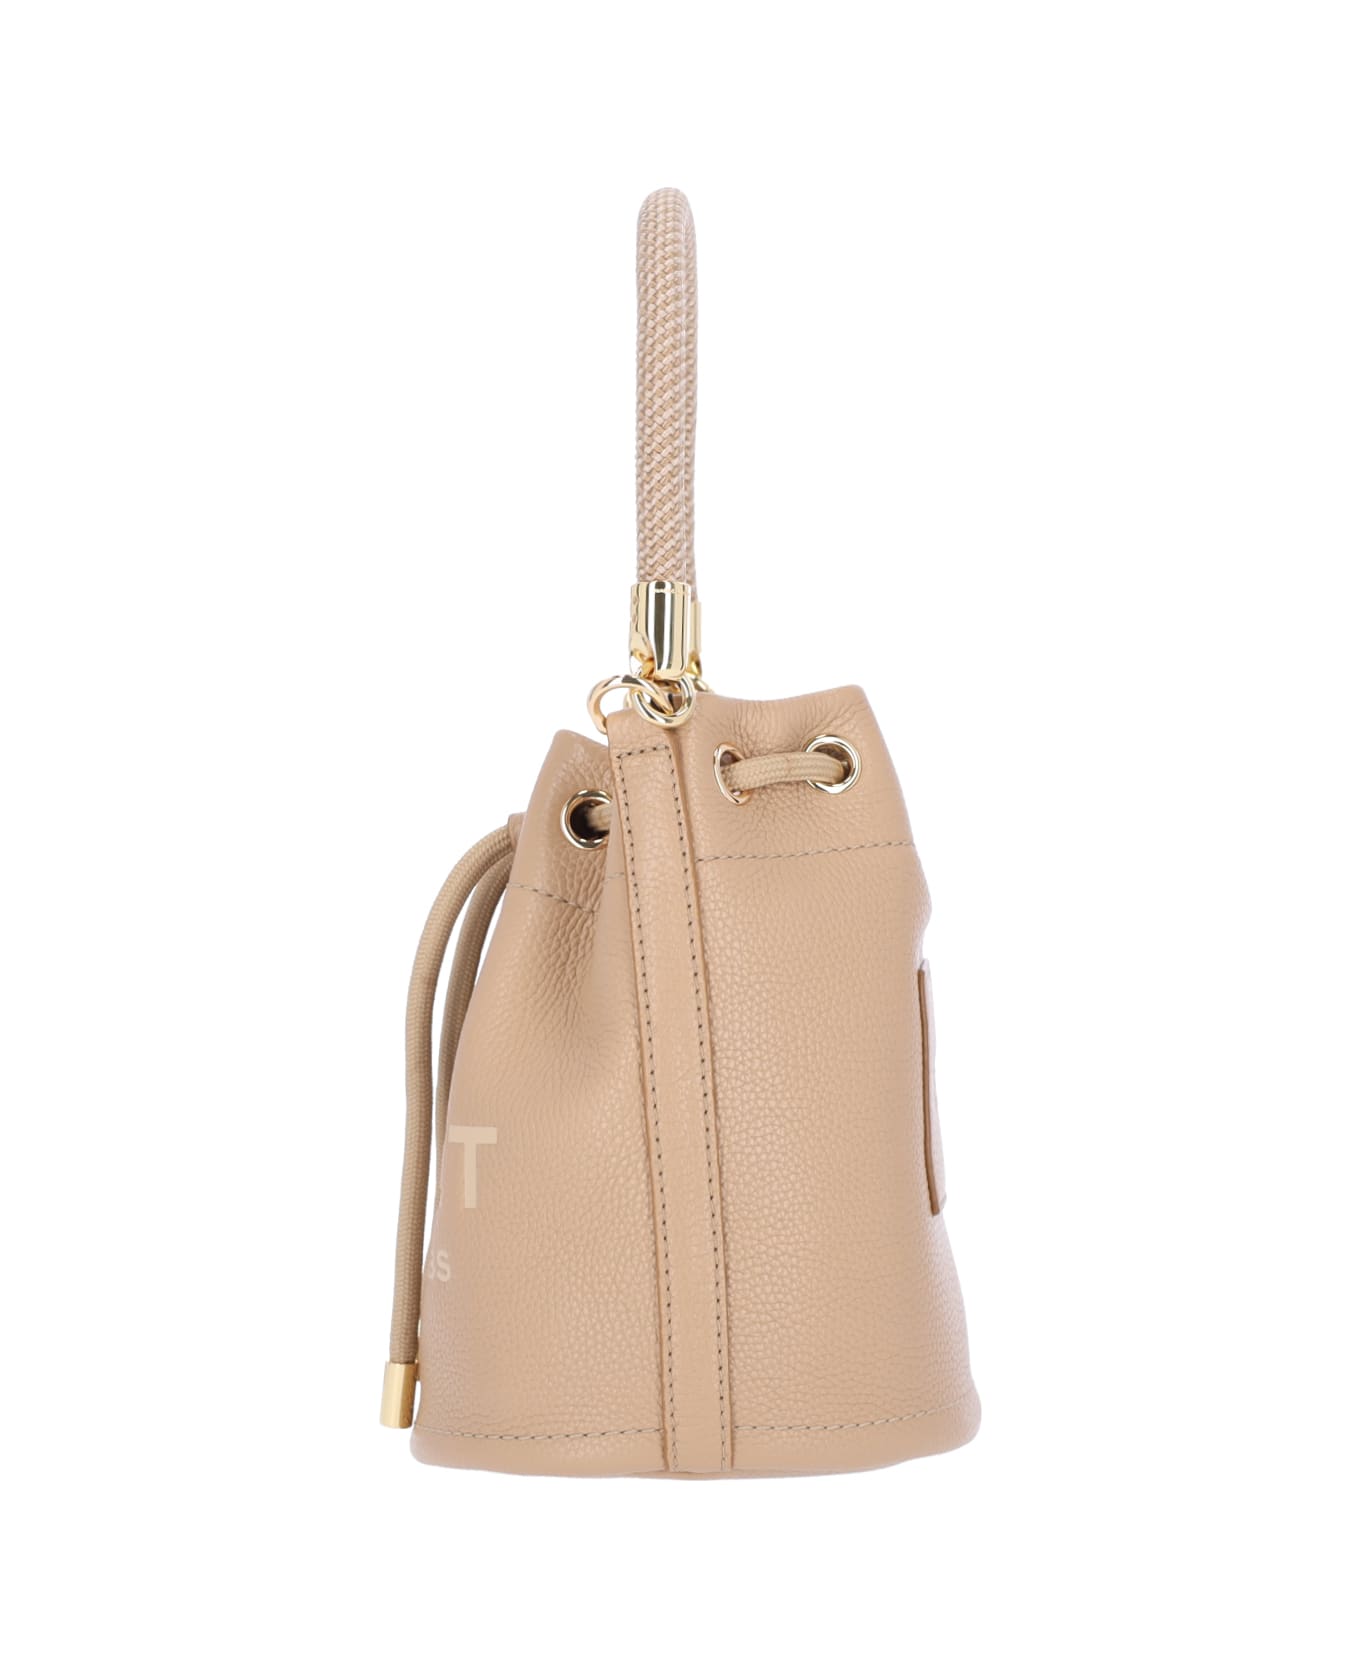 Marc Jacobs The Leather Bucket Bag - Beige